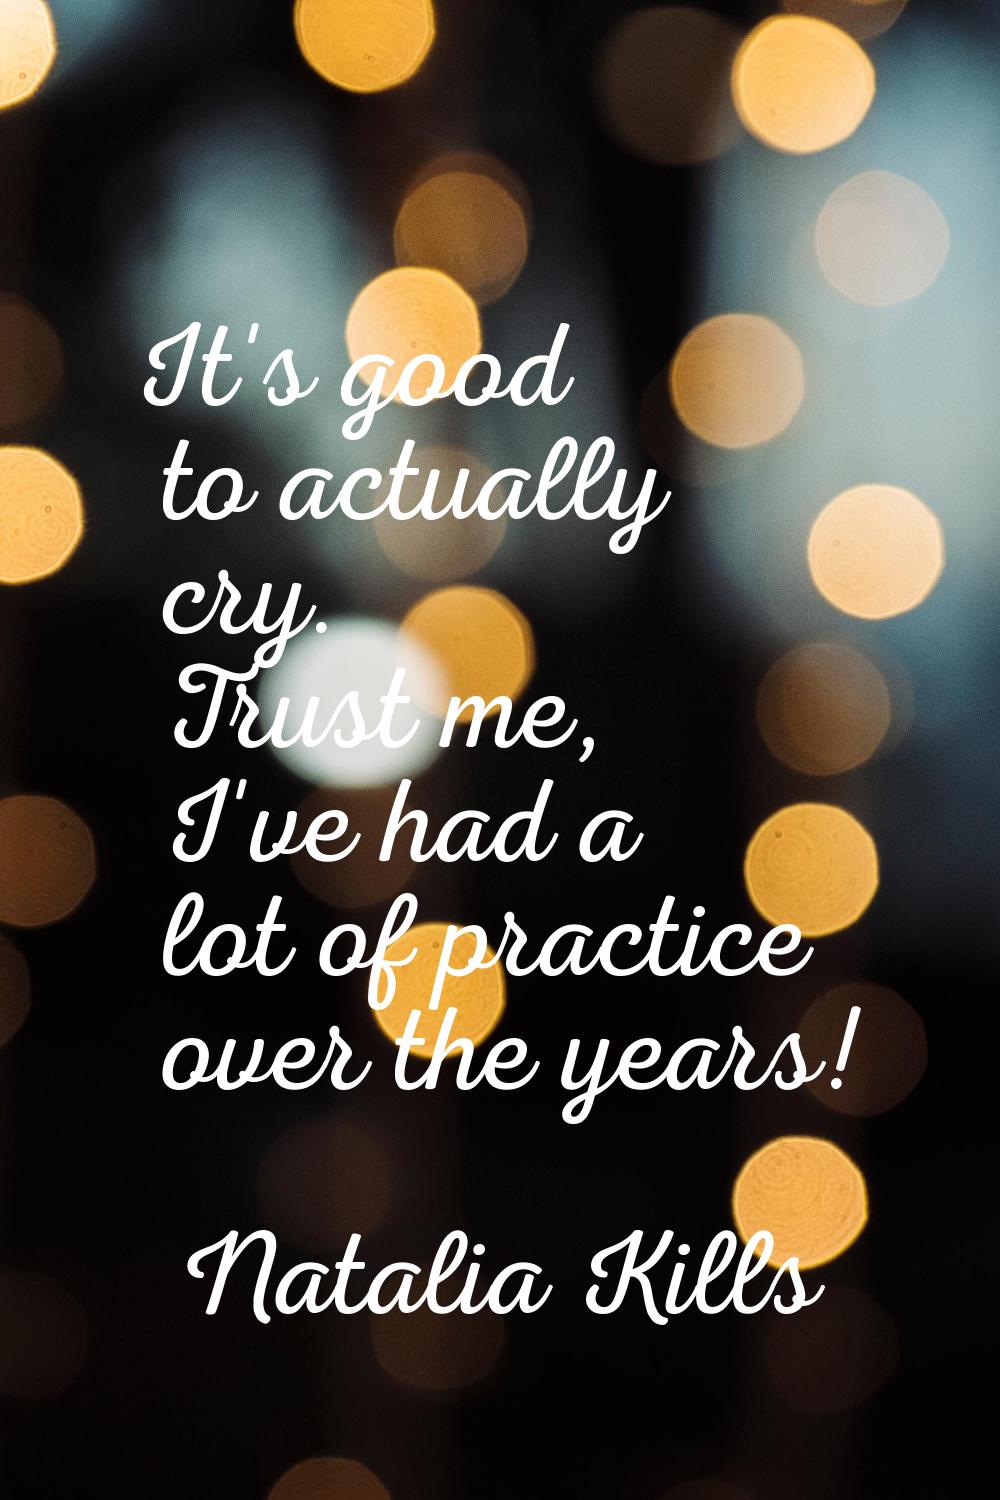 It's good to actually cry. Trust me, I've had a lot of practice over the years!